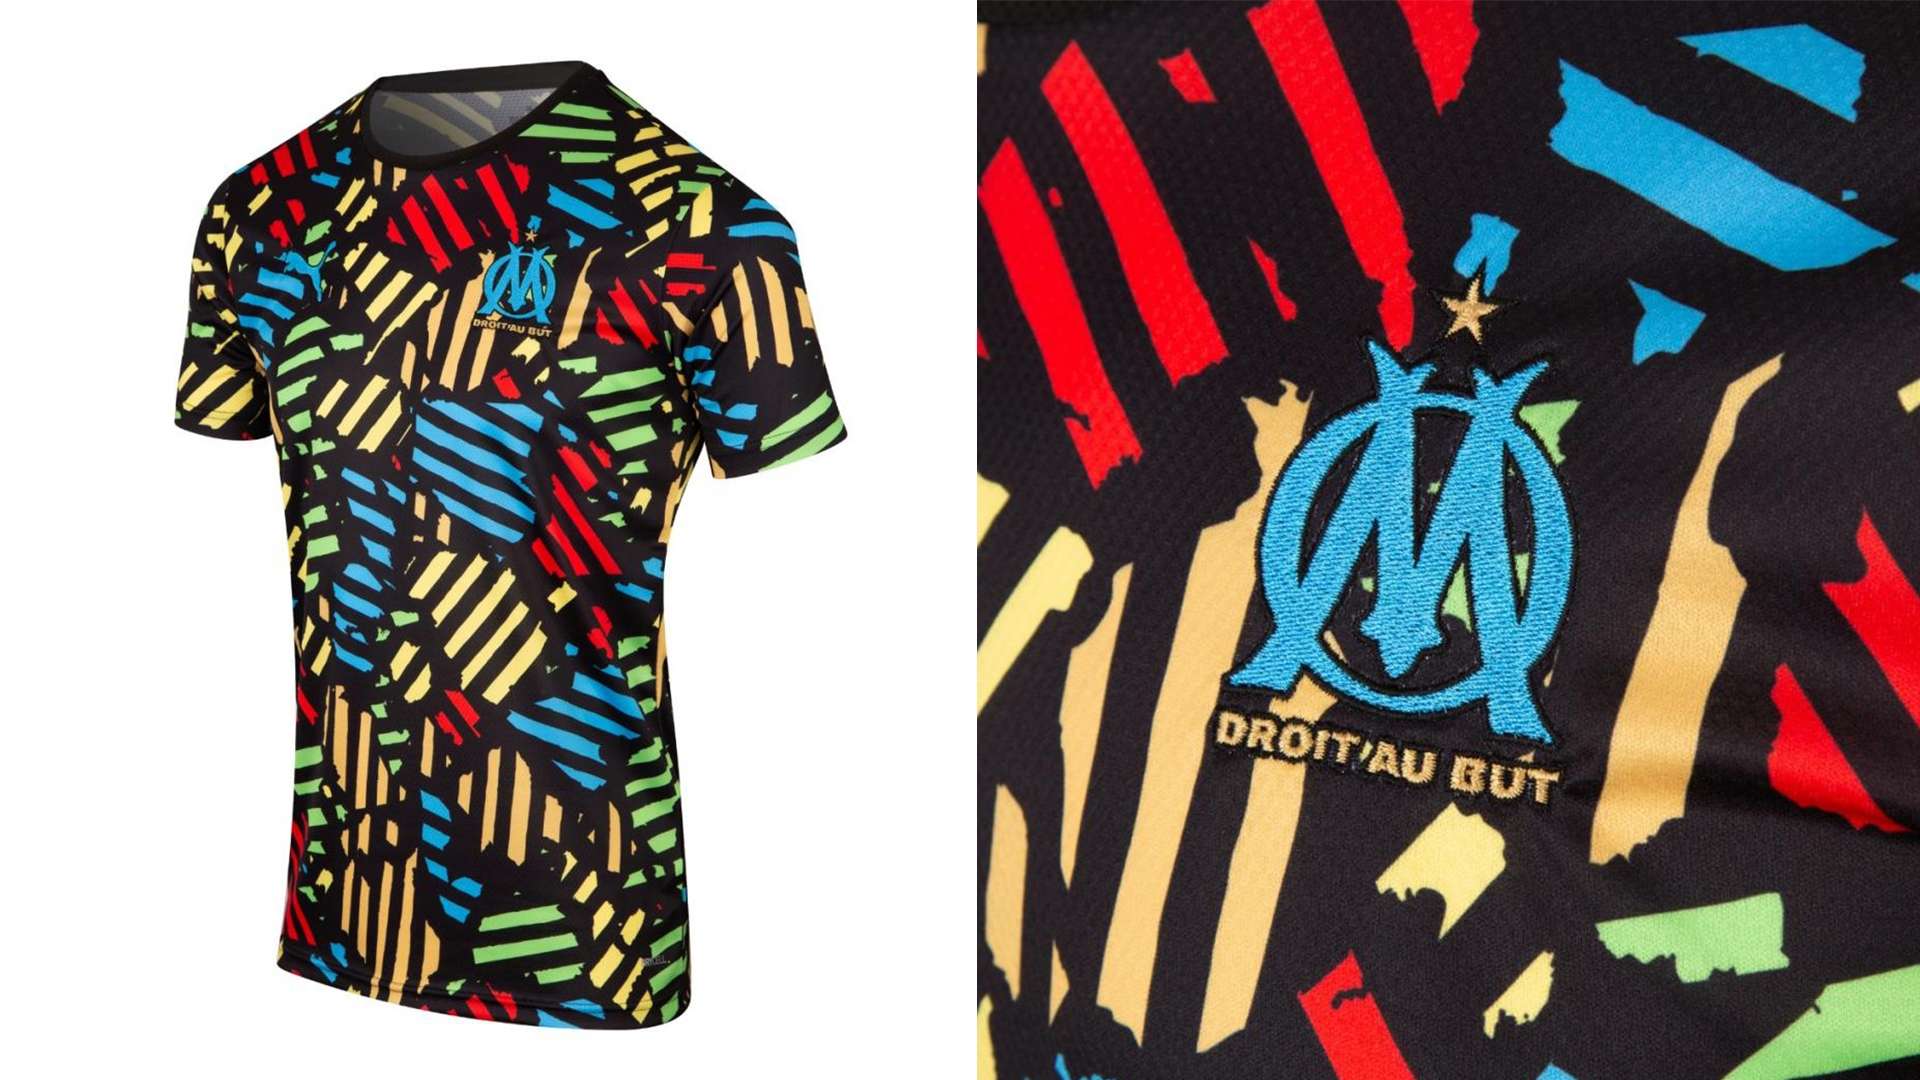 OM x Africa Black Mosaic Collector Jersey